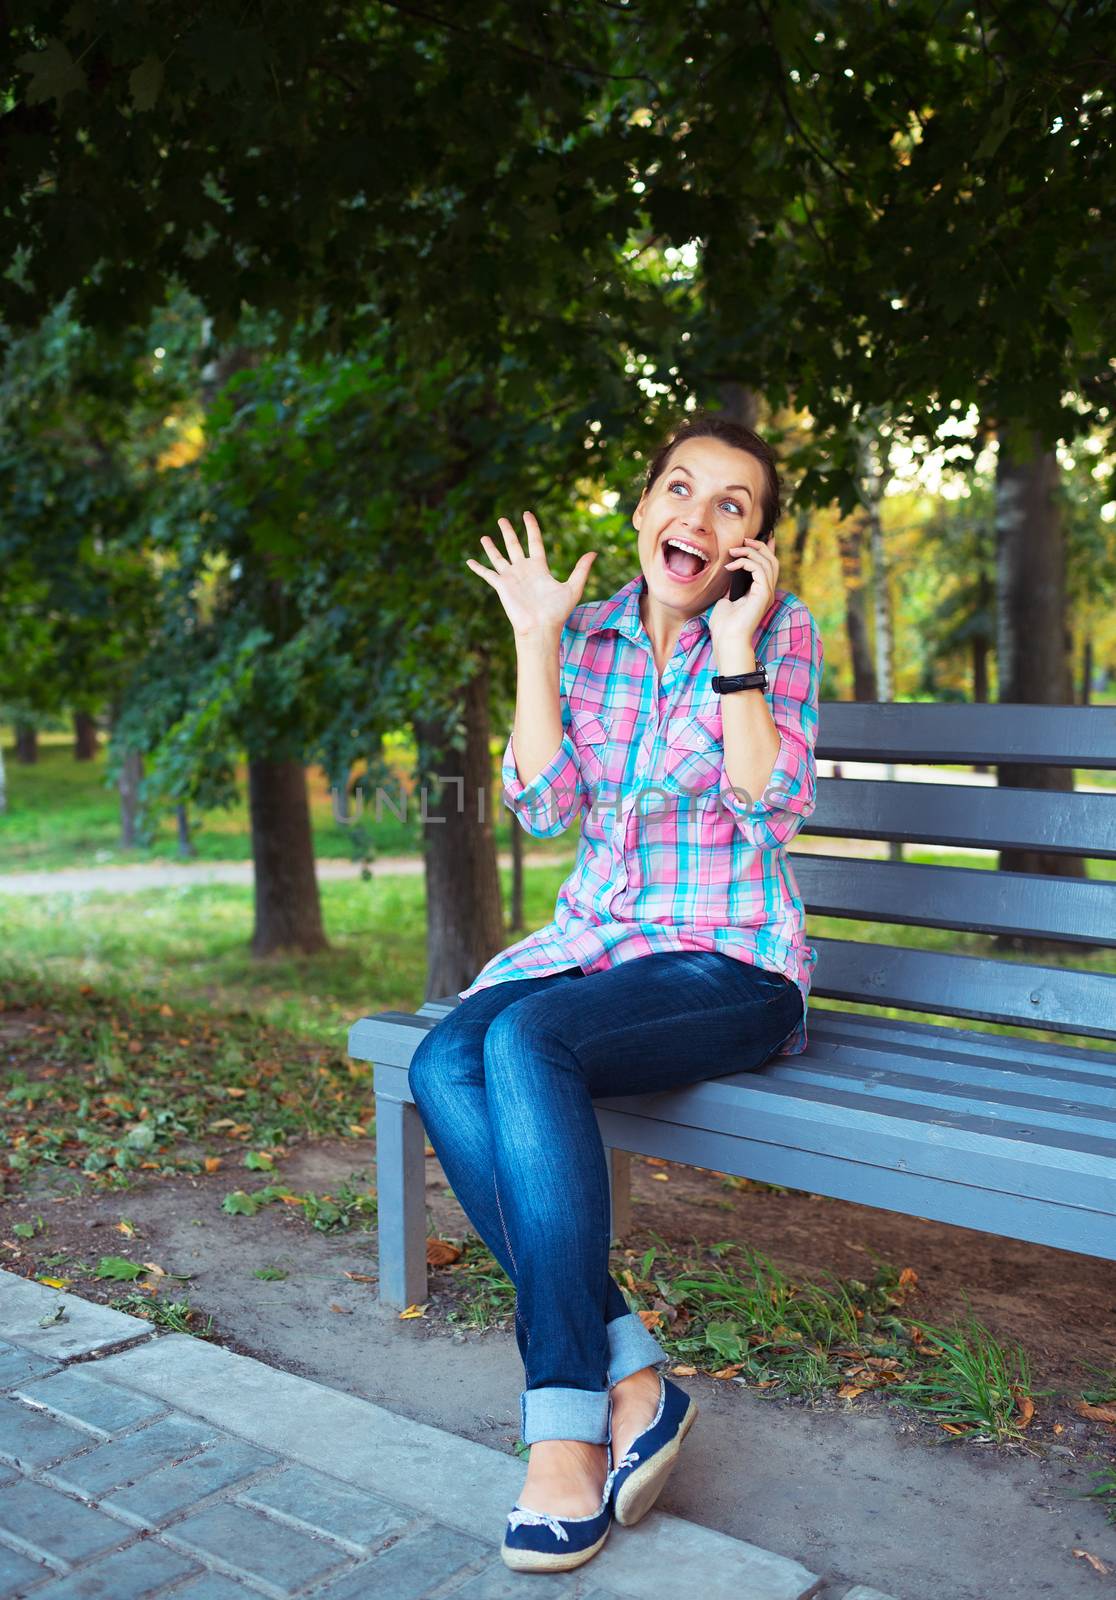 A portrait of a smiling beautiful woman in a park on a bench talking on the phone